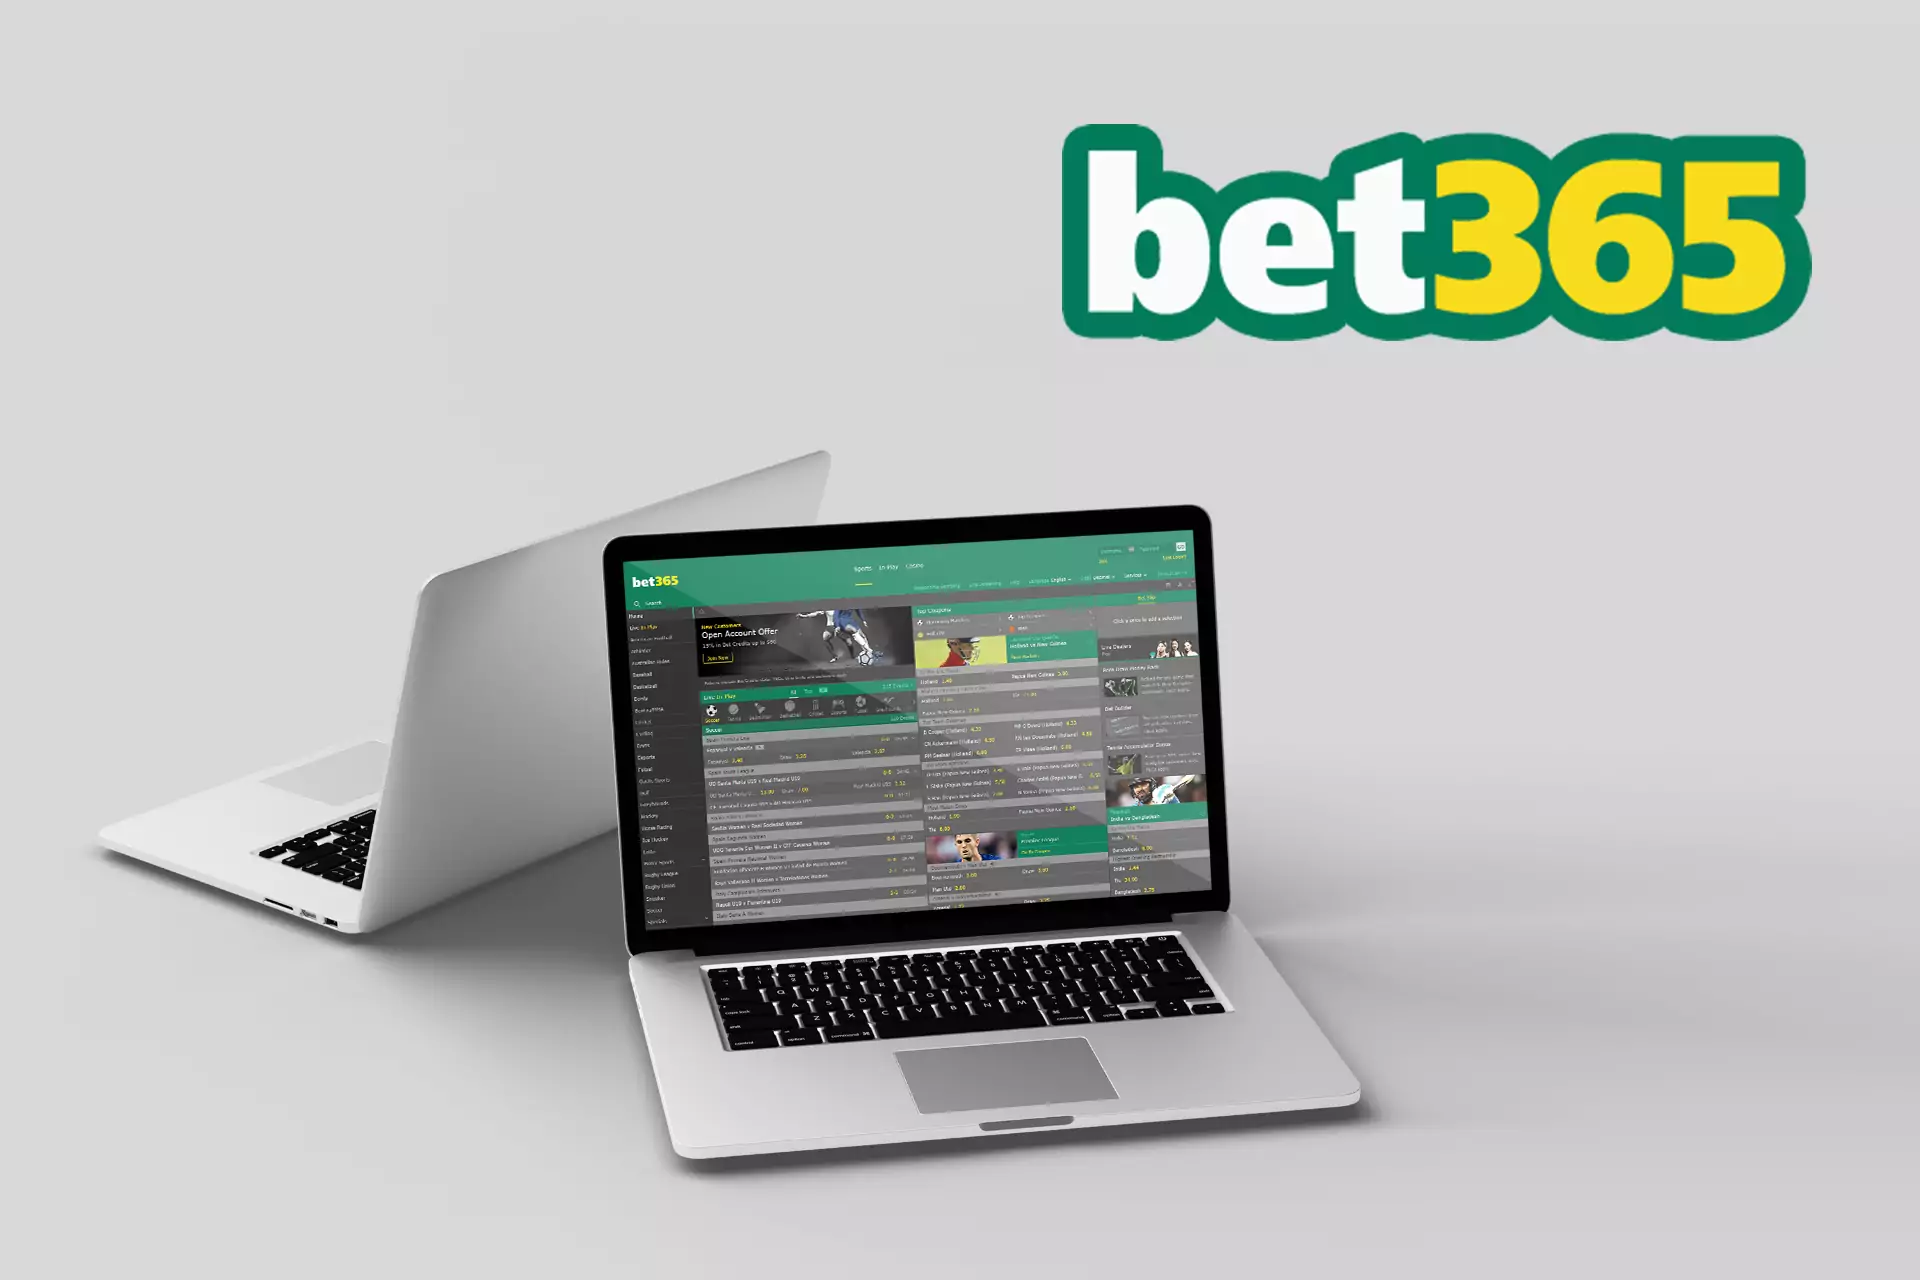 Bet365 uses familiar for US users&#039; payment methods.